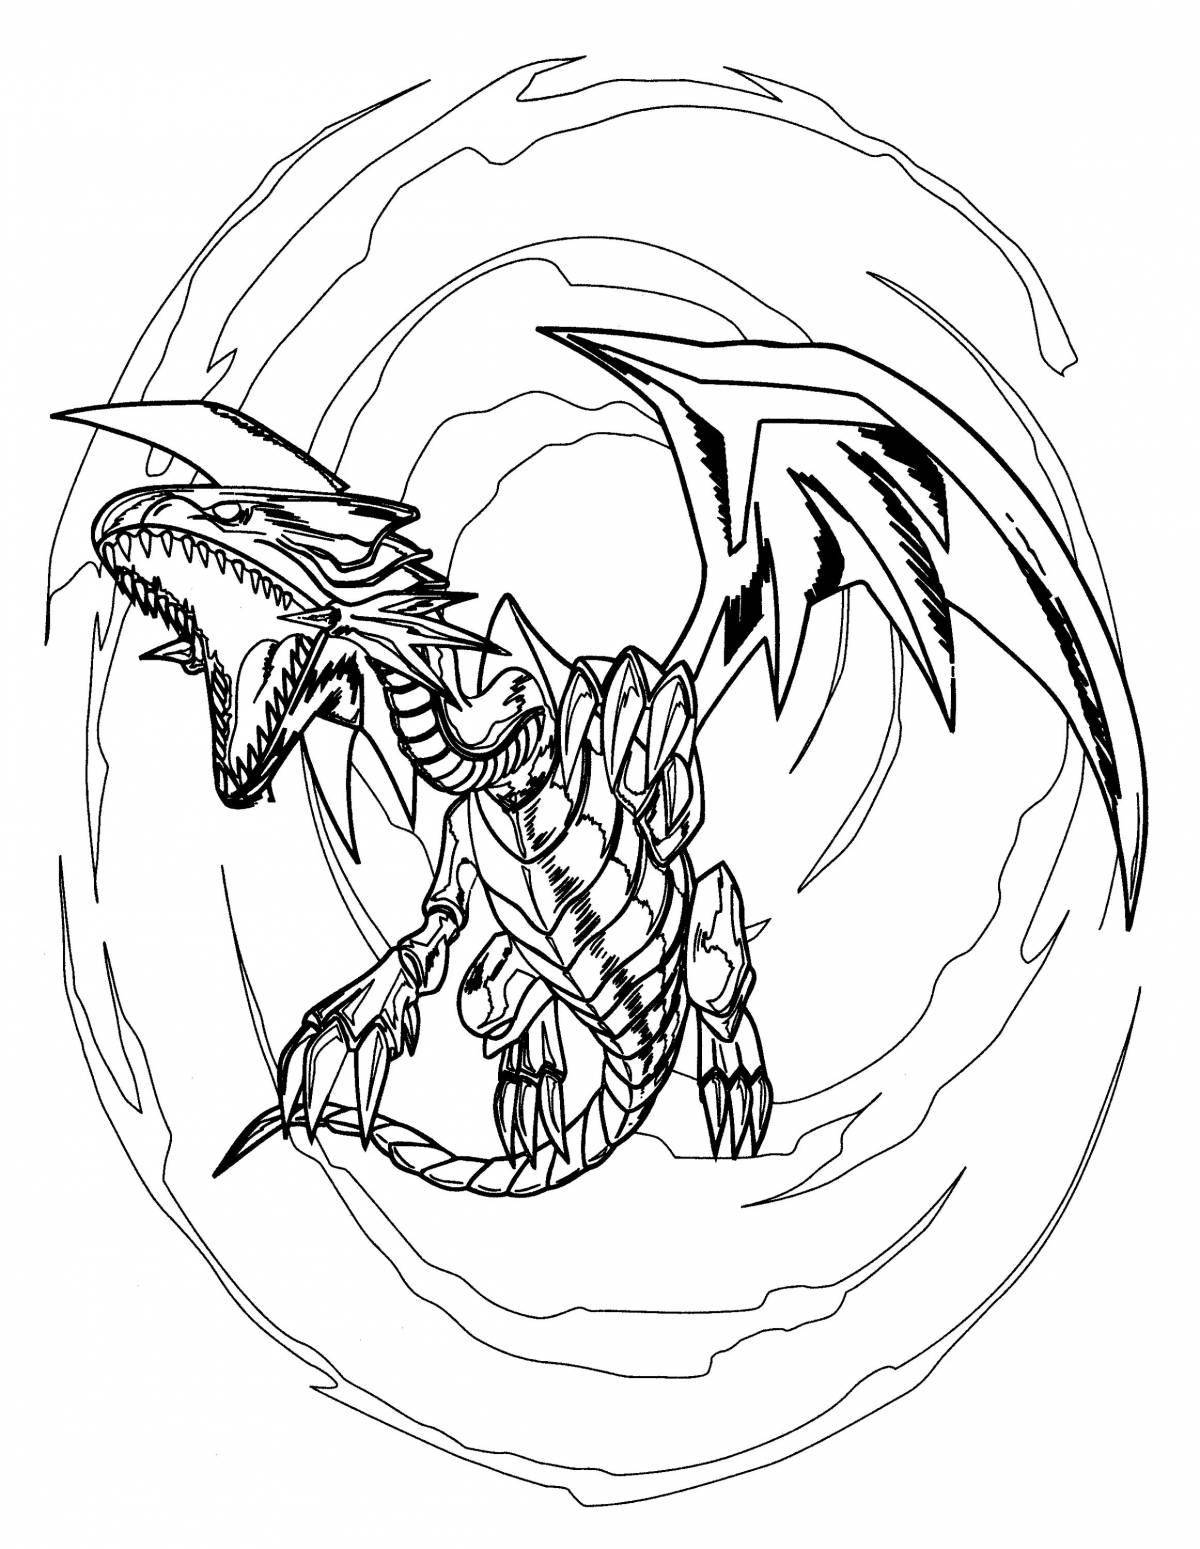 Majestic robot dragon coloring page